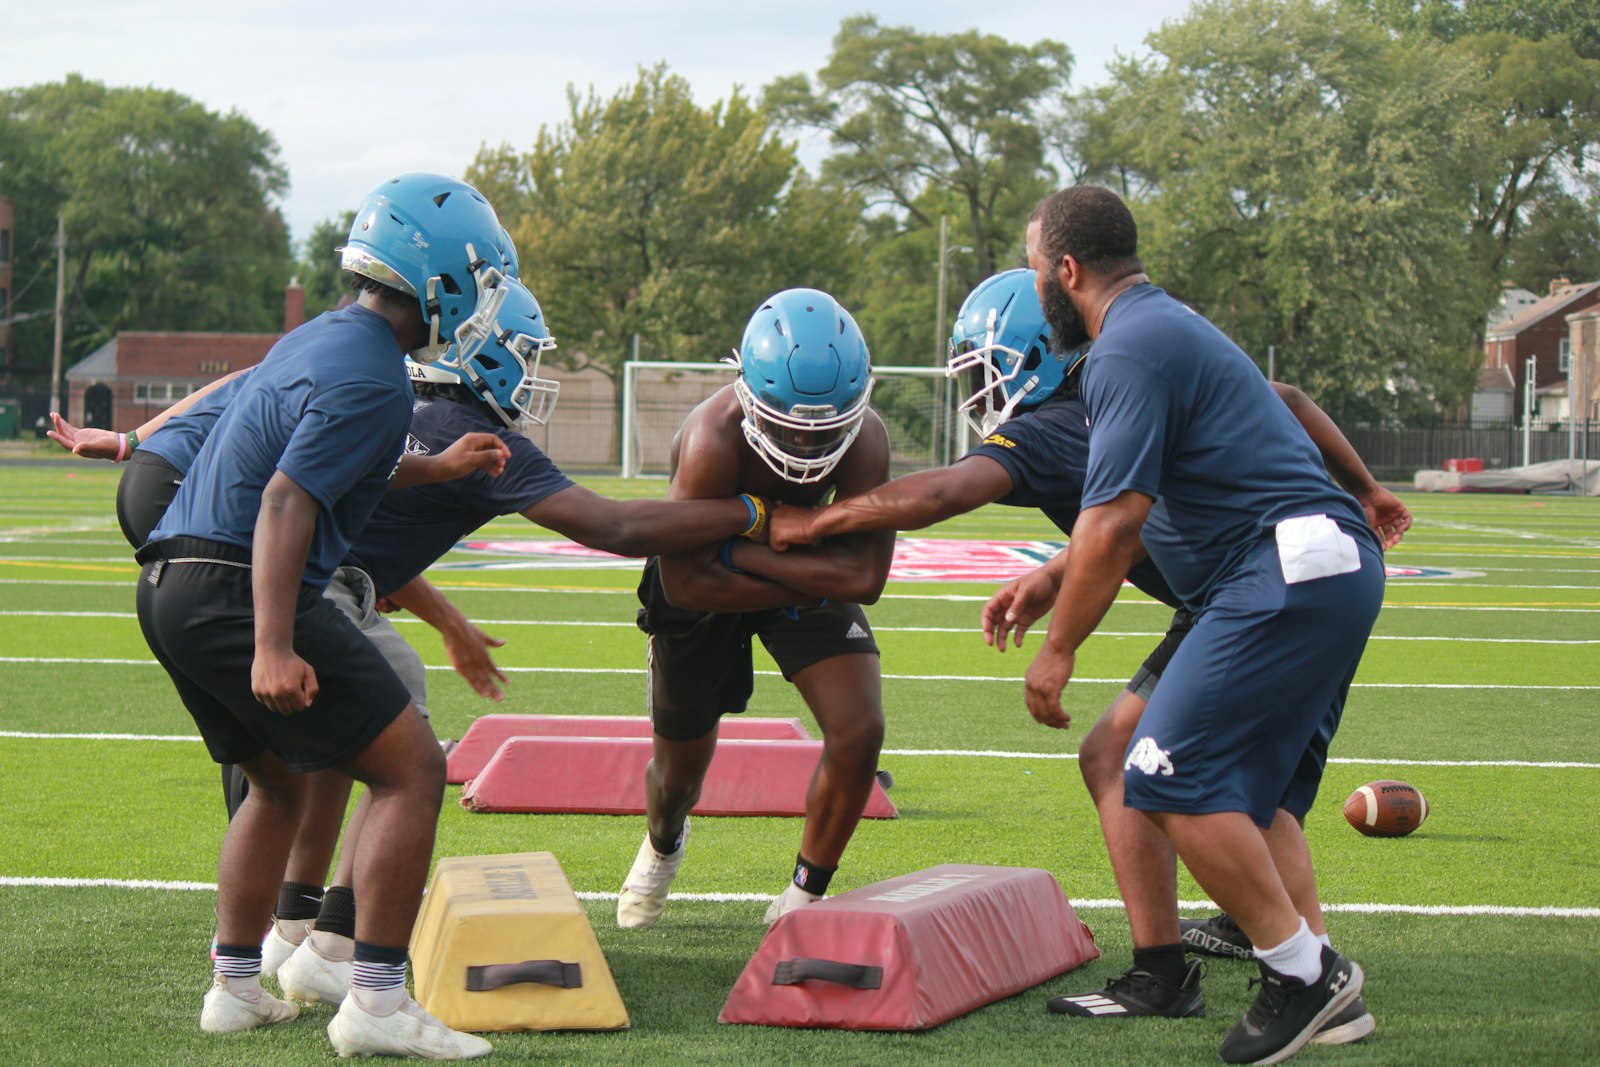 Loyola running backs work on a drill while practicing on the University of Detroit Mercy campus. The Bulldogs will open their season with a home game there on Aug. 26.